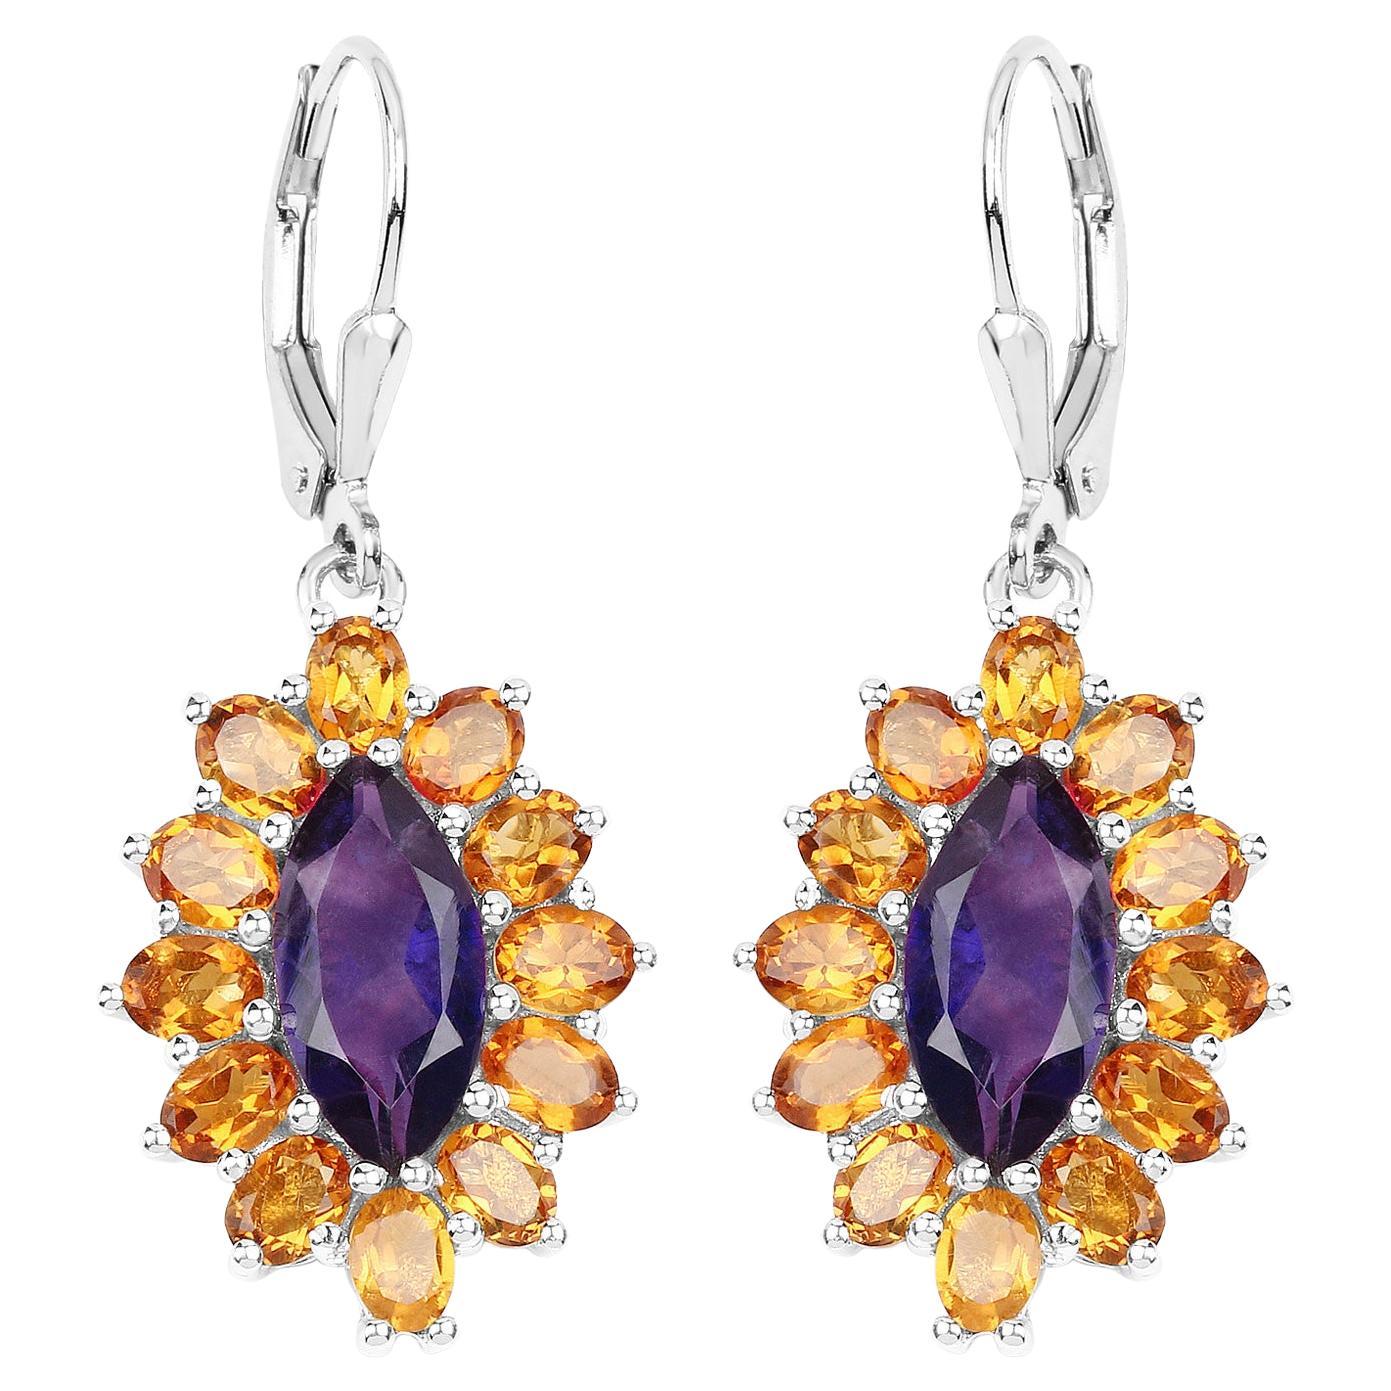 Natural 6.55 Carat Madeira Citrine & Amethyst Dangle Earrings Sterling Silver